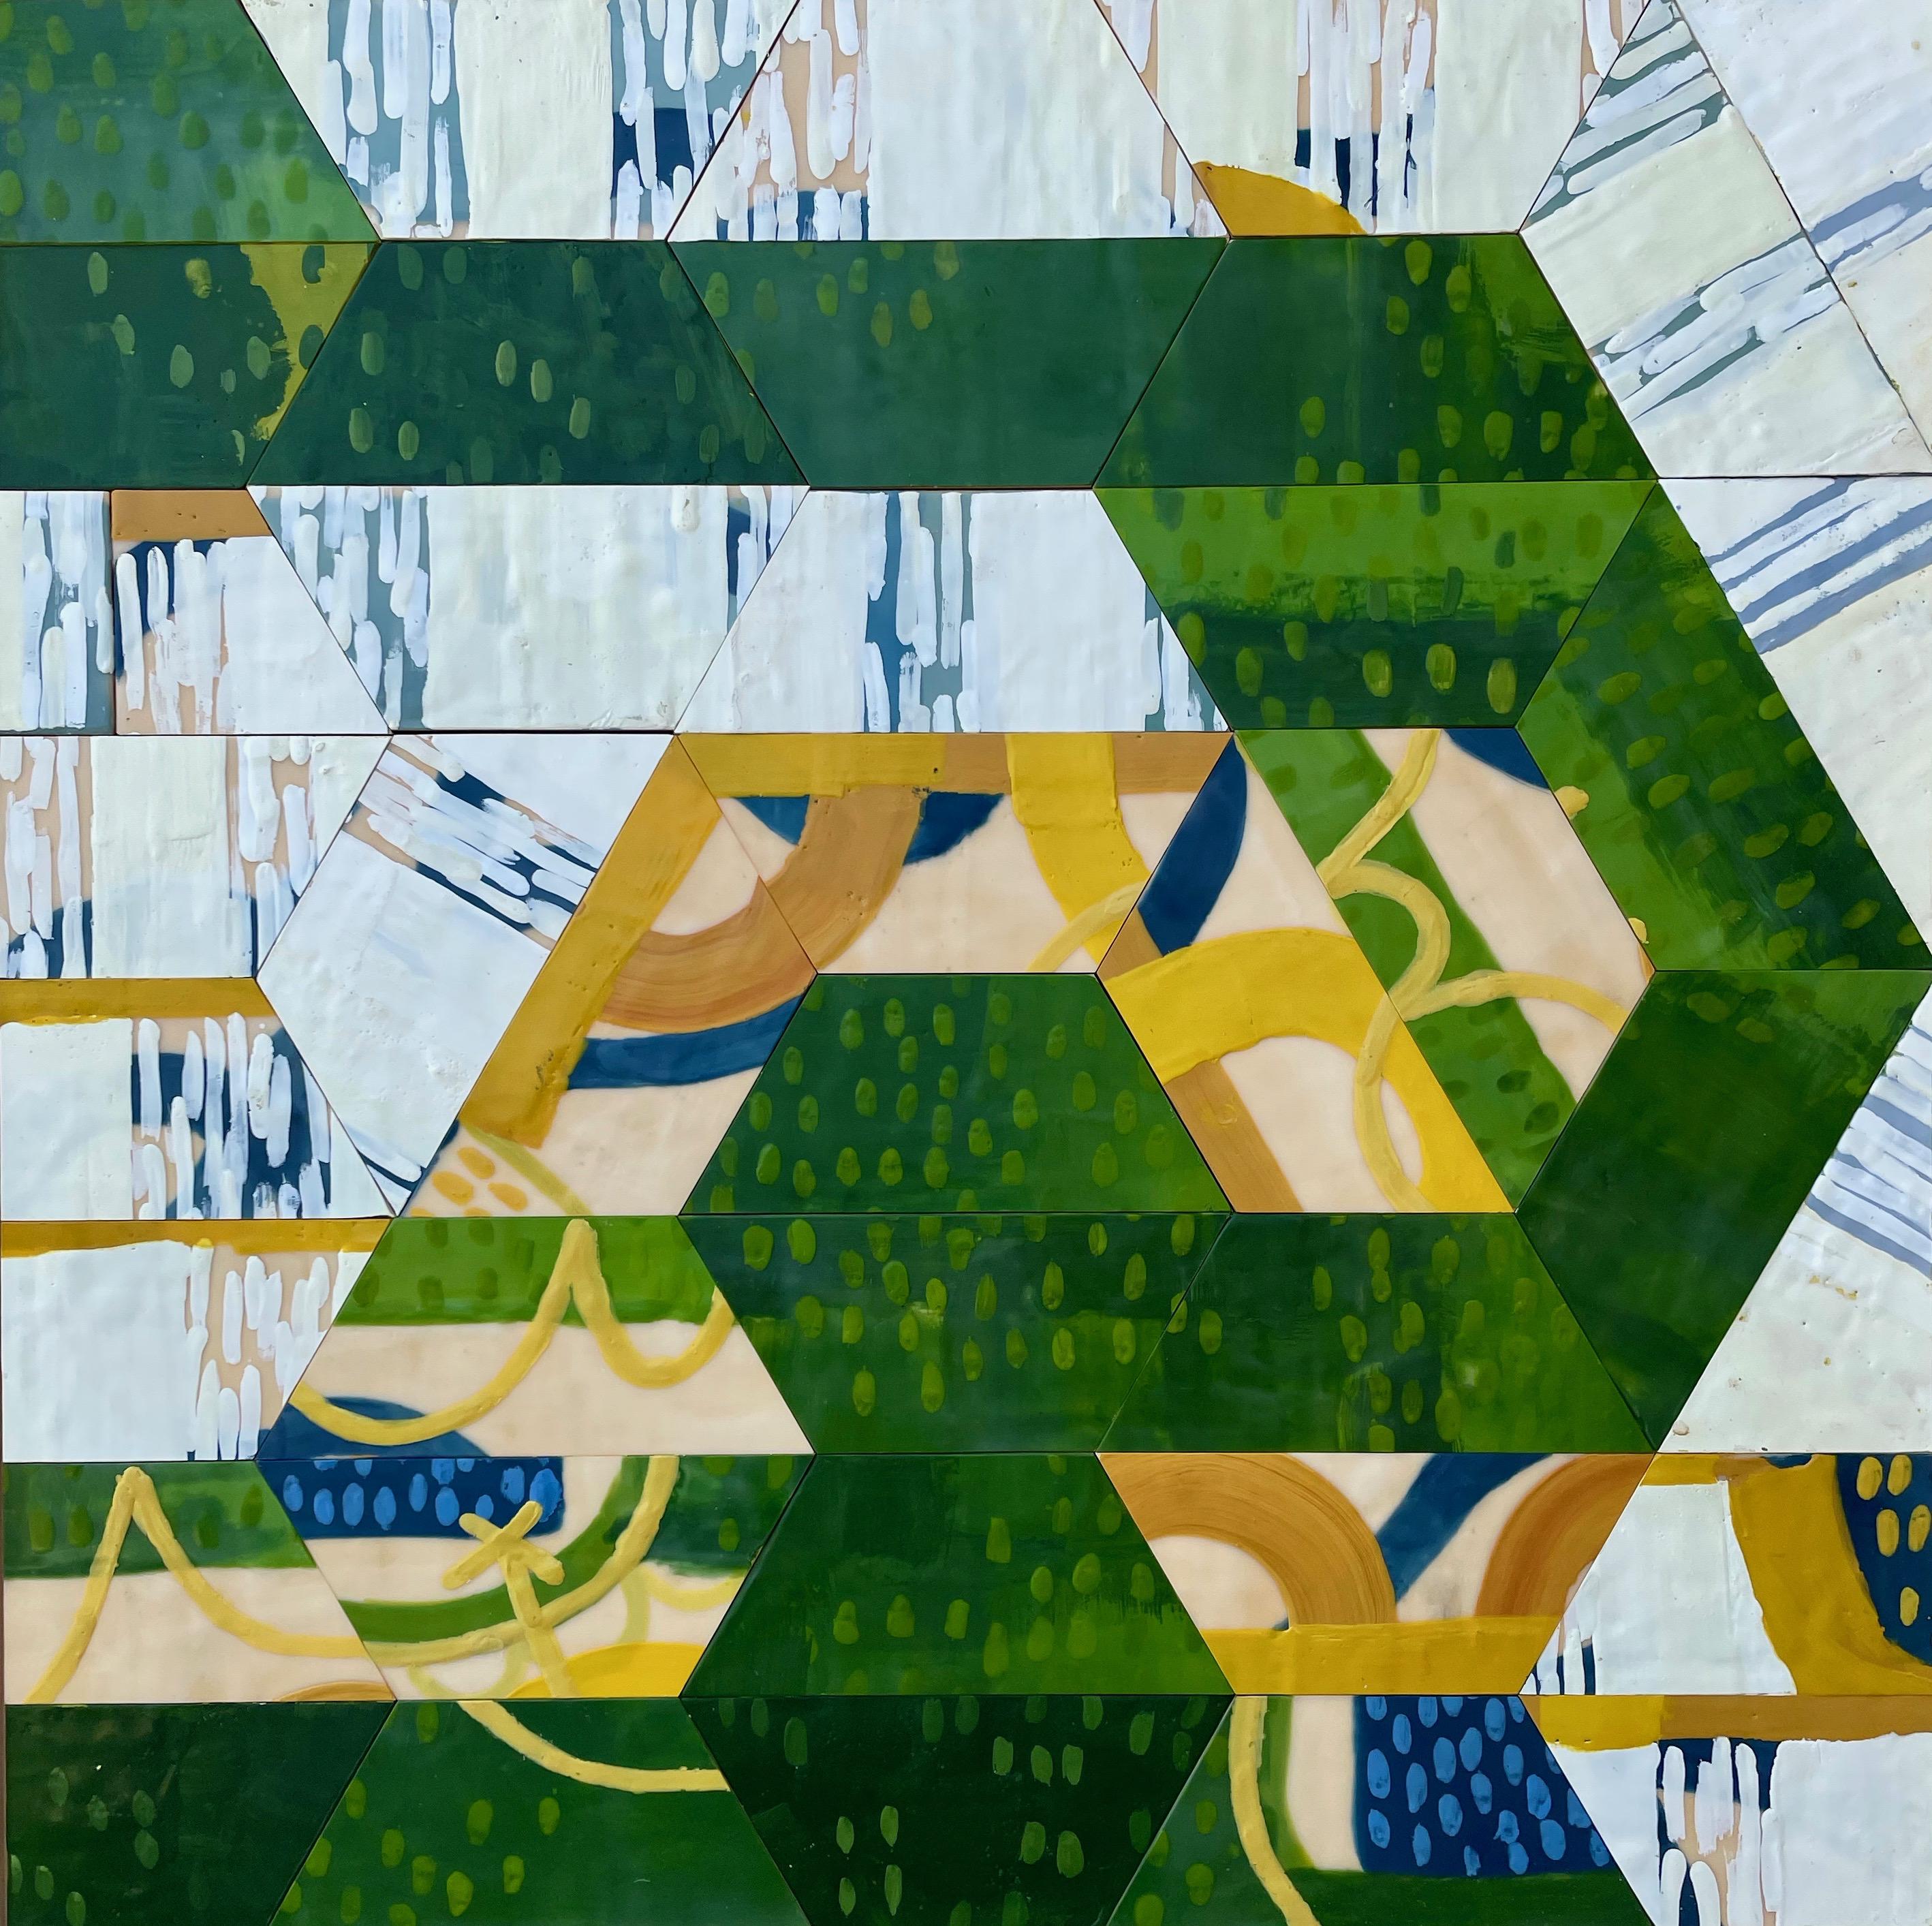 Cul-de-sac, green and blue abstract encaustic painting on panel